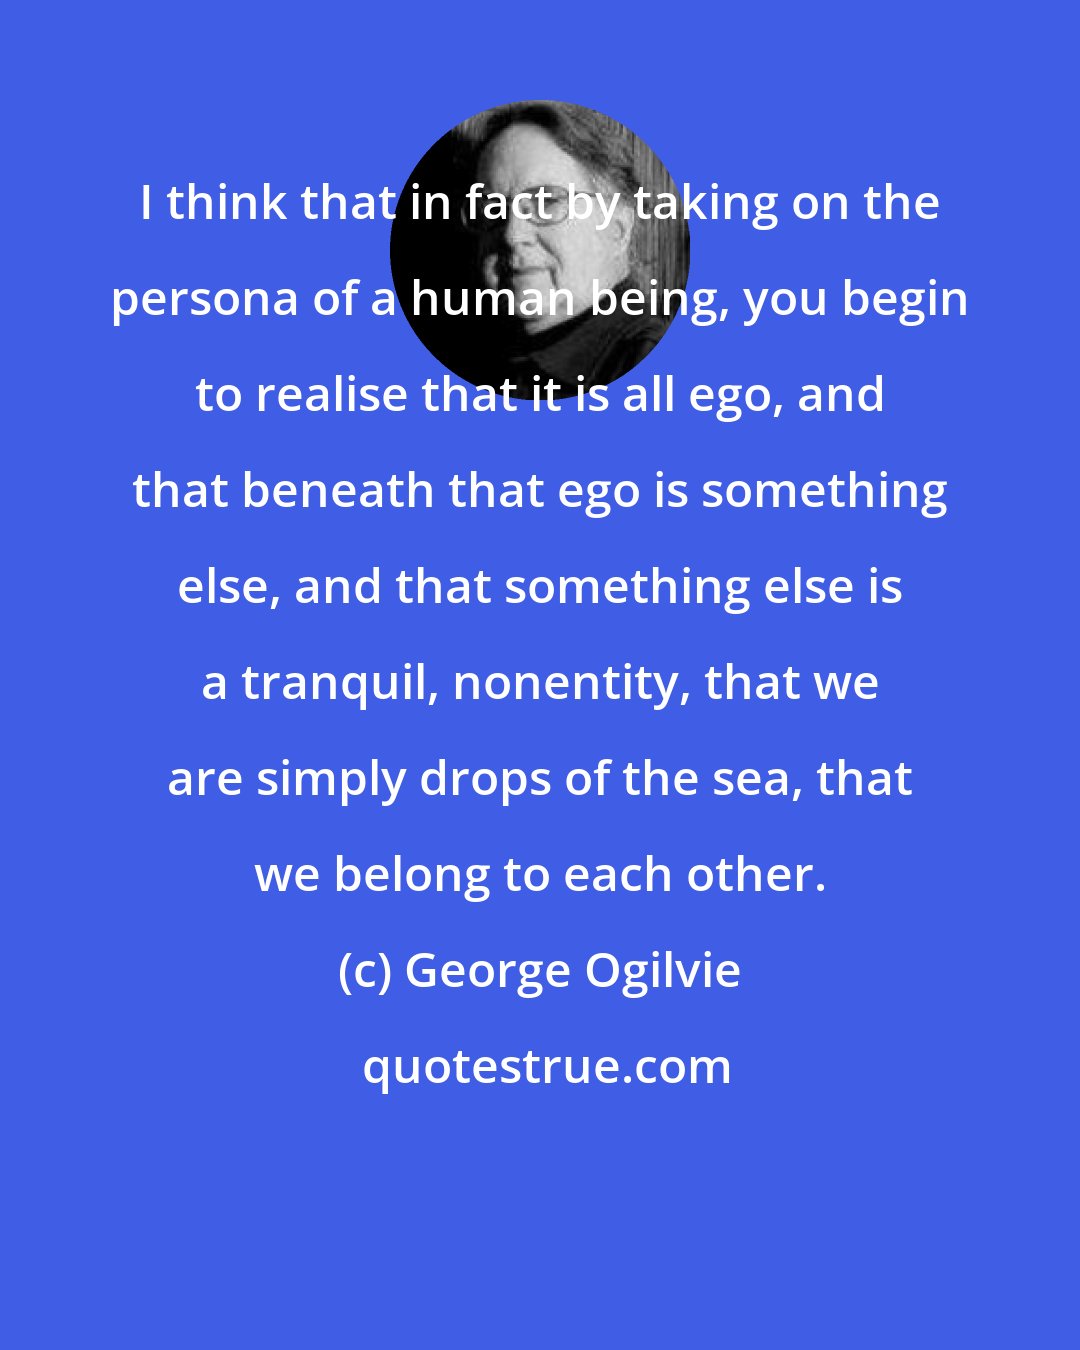 George Ogilvie: I think that in fact by taking on the persona of a human being, you begin to realise that it is all ego, and that beneath that ego is something else, and that something else is a tranquil, nonentity, that we are simply drops of the sea, that we belong to each other.